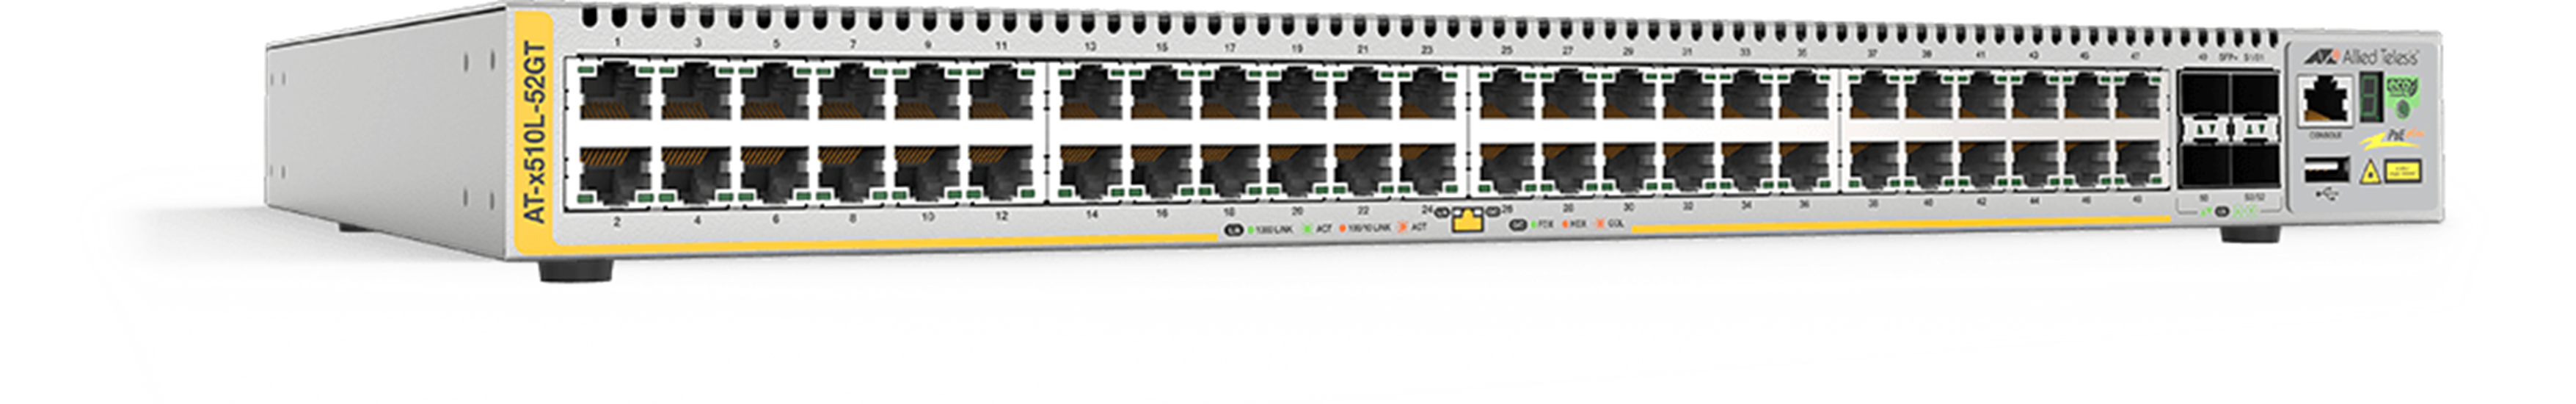 AT-x510L series - Advanced Gigabit Layer 3 Stackable Switch